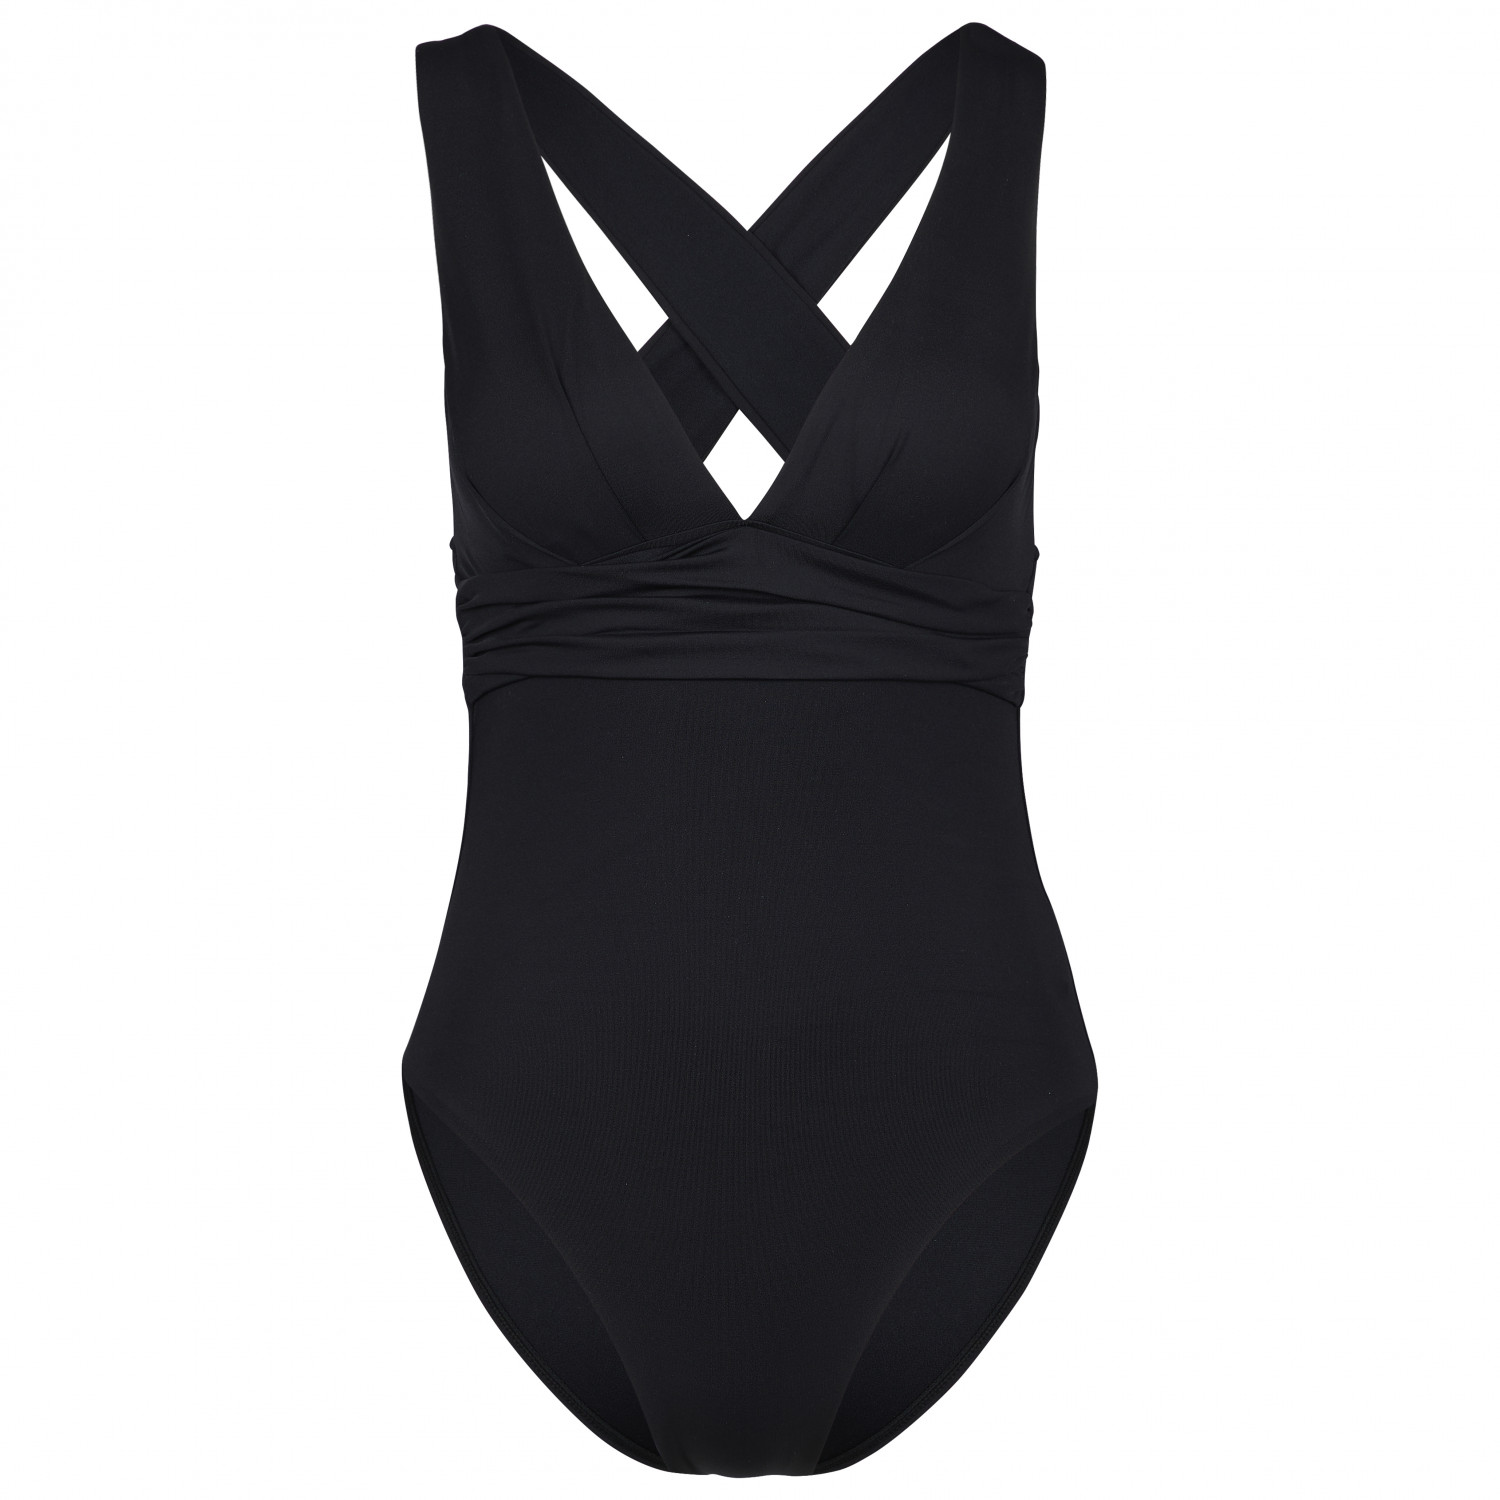 Купальник Seafolly Women's Collective Cross Back One Piece, черный cross back vest top women lingerie pad sleeveless straps knitted tube tank tops one piece female camisoles